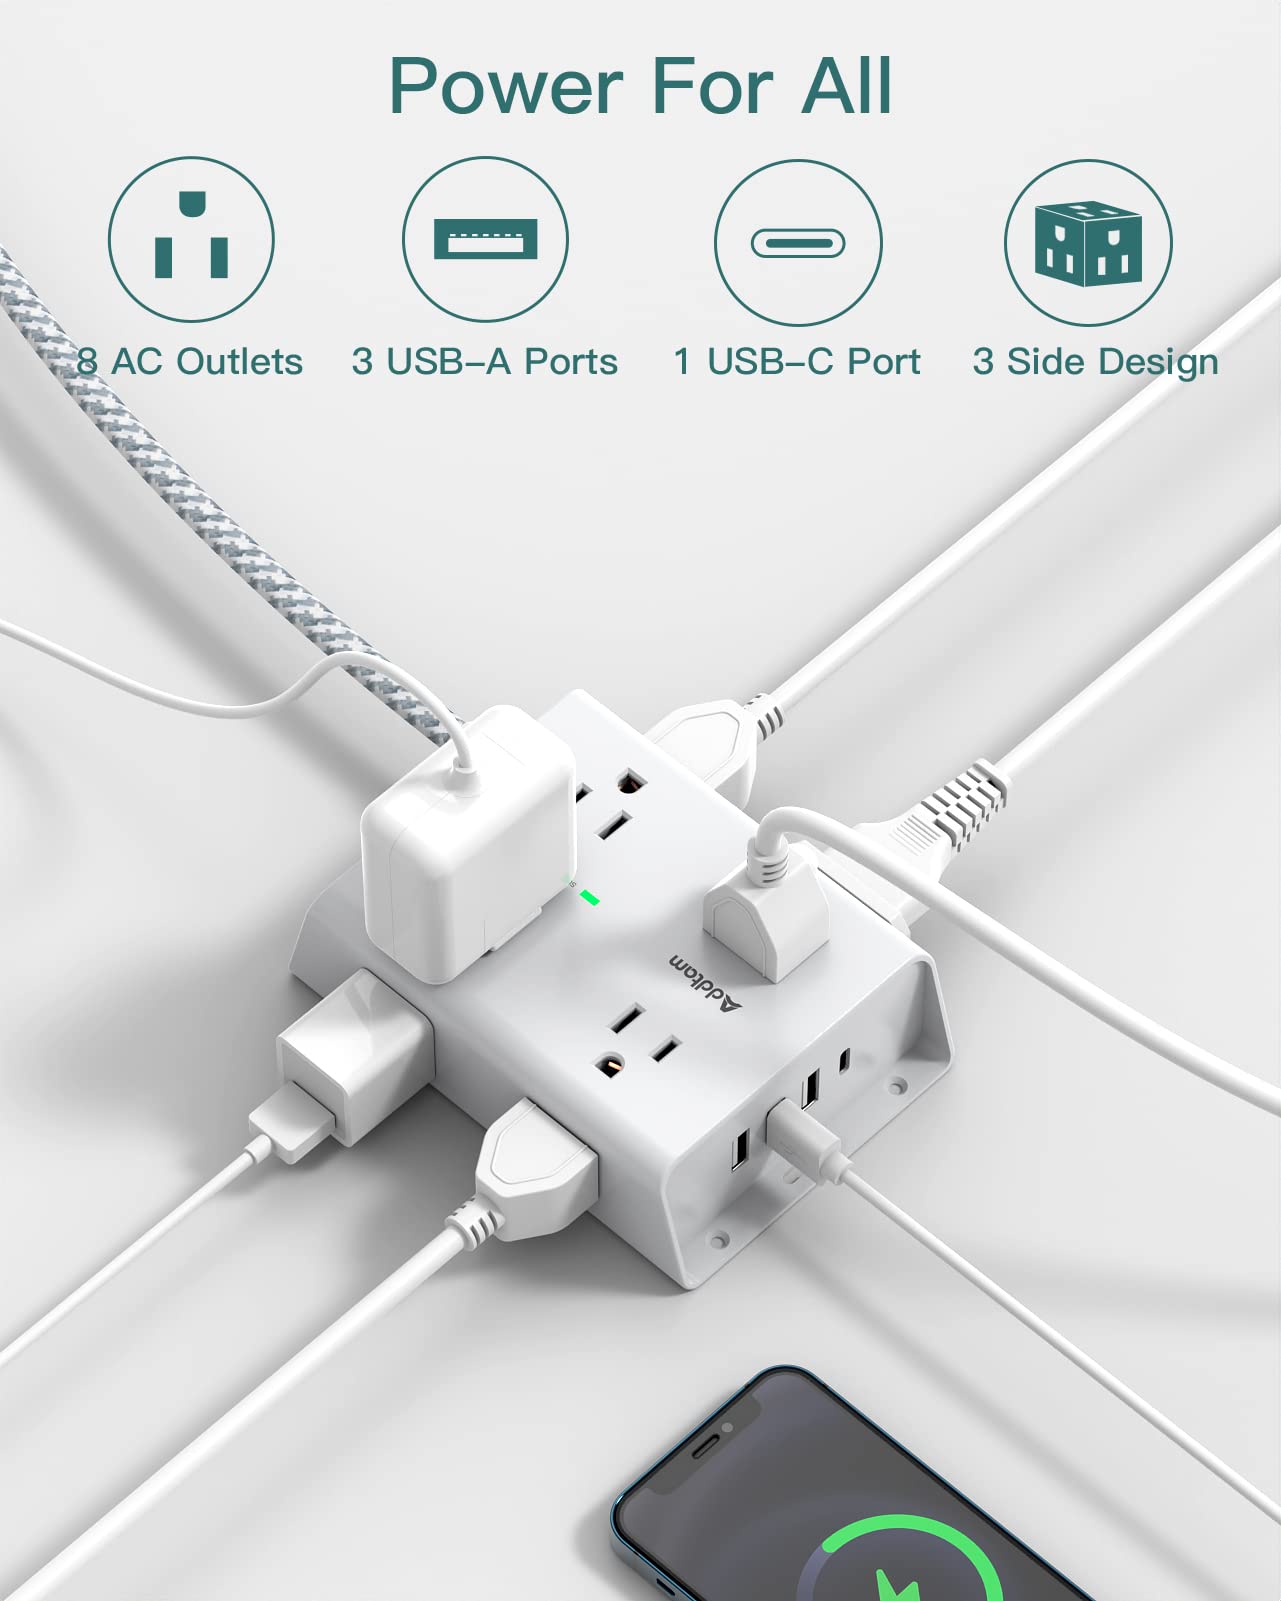 Surge Protector Power Strip - 8 Widely Outlets with 4 USB Ports(1 USB C Outlet), Addtam 3-Side Outlet Extender Strip with 5Ft Extension Cord, Flat Plug, Wall Mount for Dorm Home Office, ETL Listed